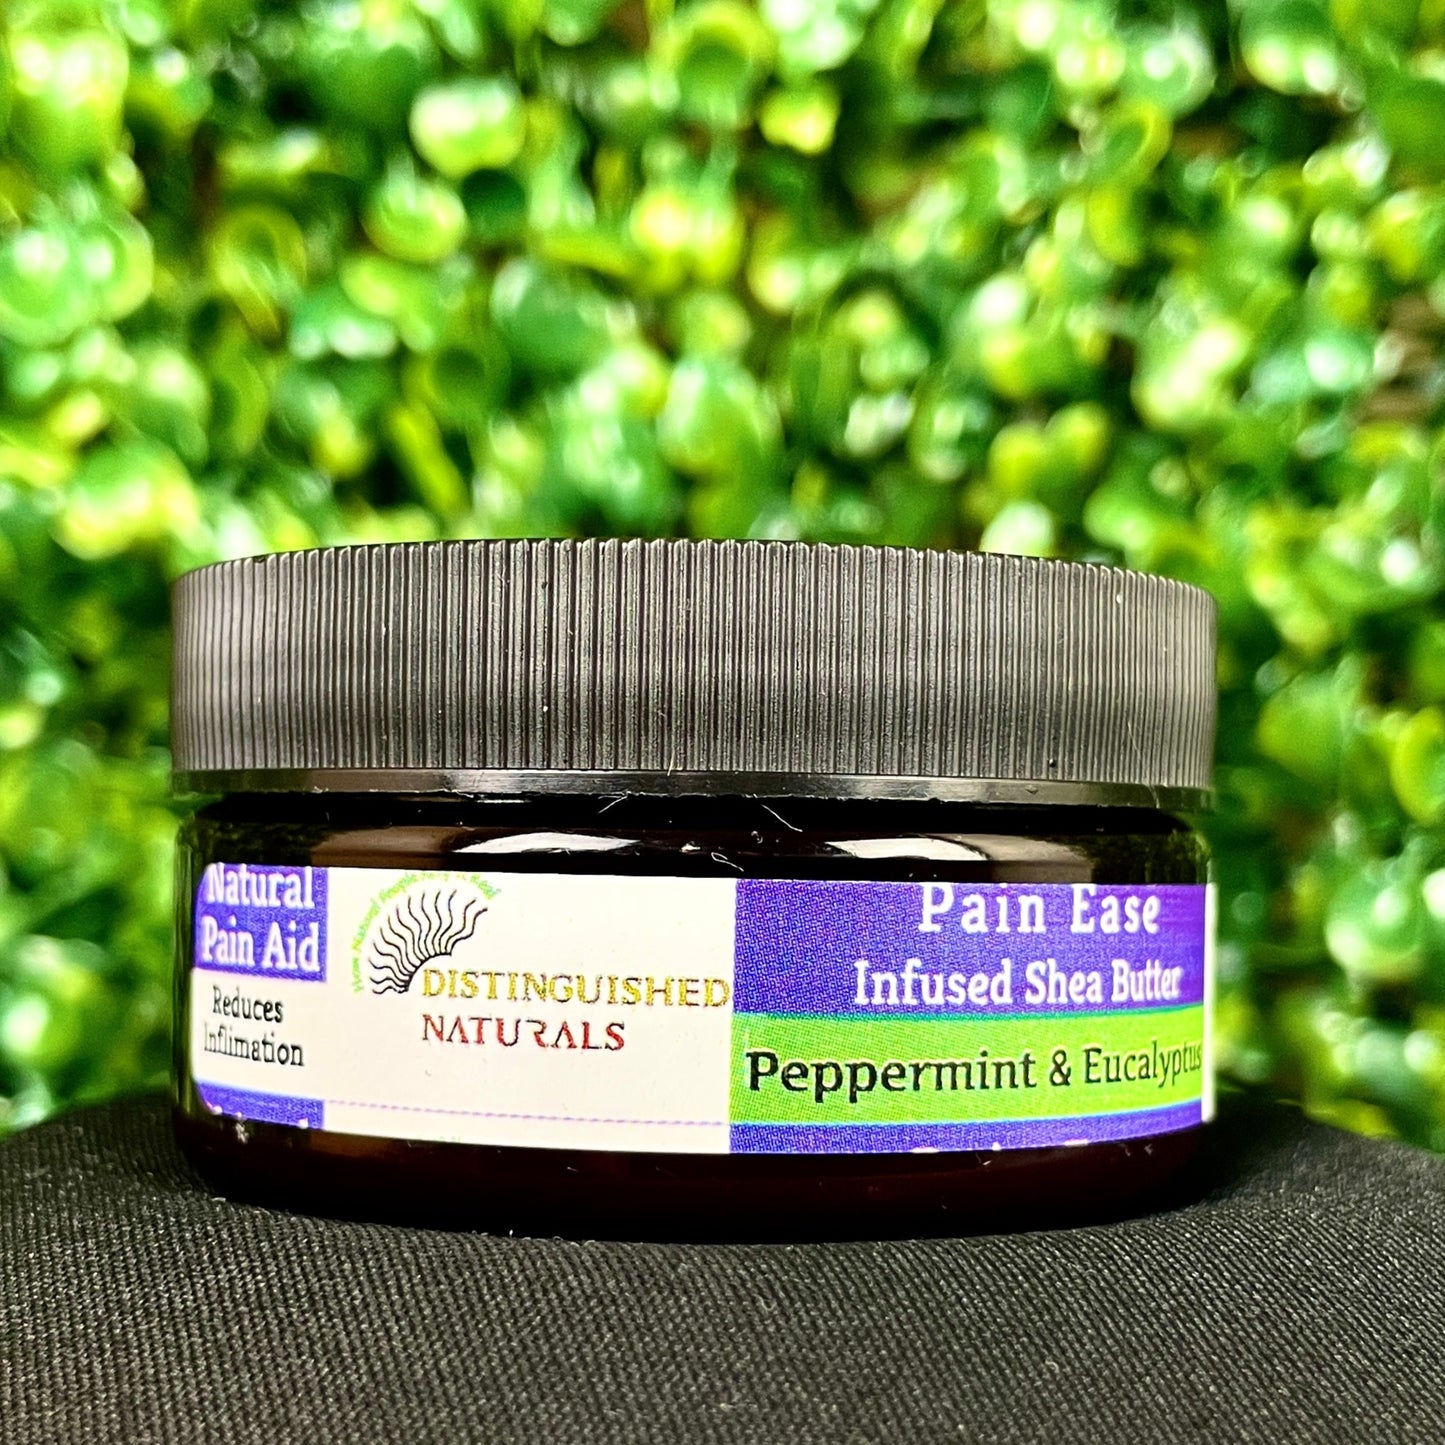 Holistic Pain Ease - Topical Aid. Helps with Sore muscles, Pain, Congestion, thinning hair, itchy skin and more!